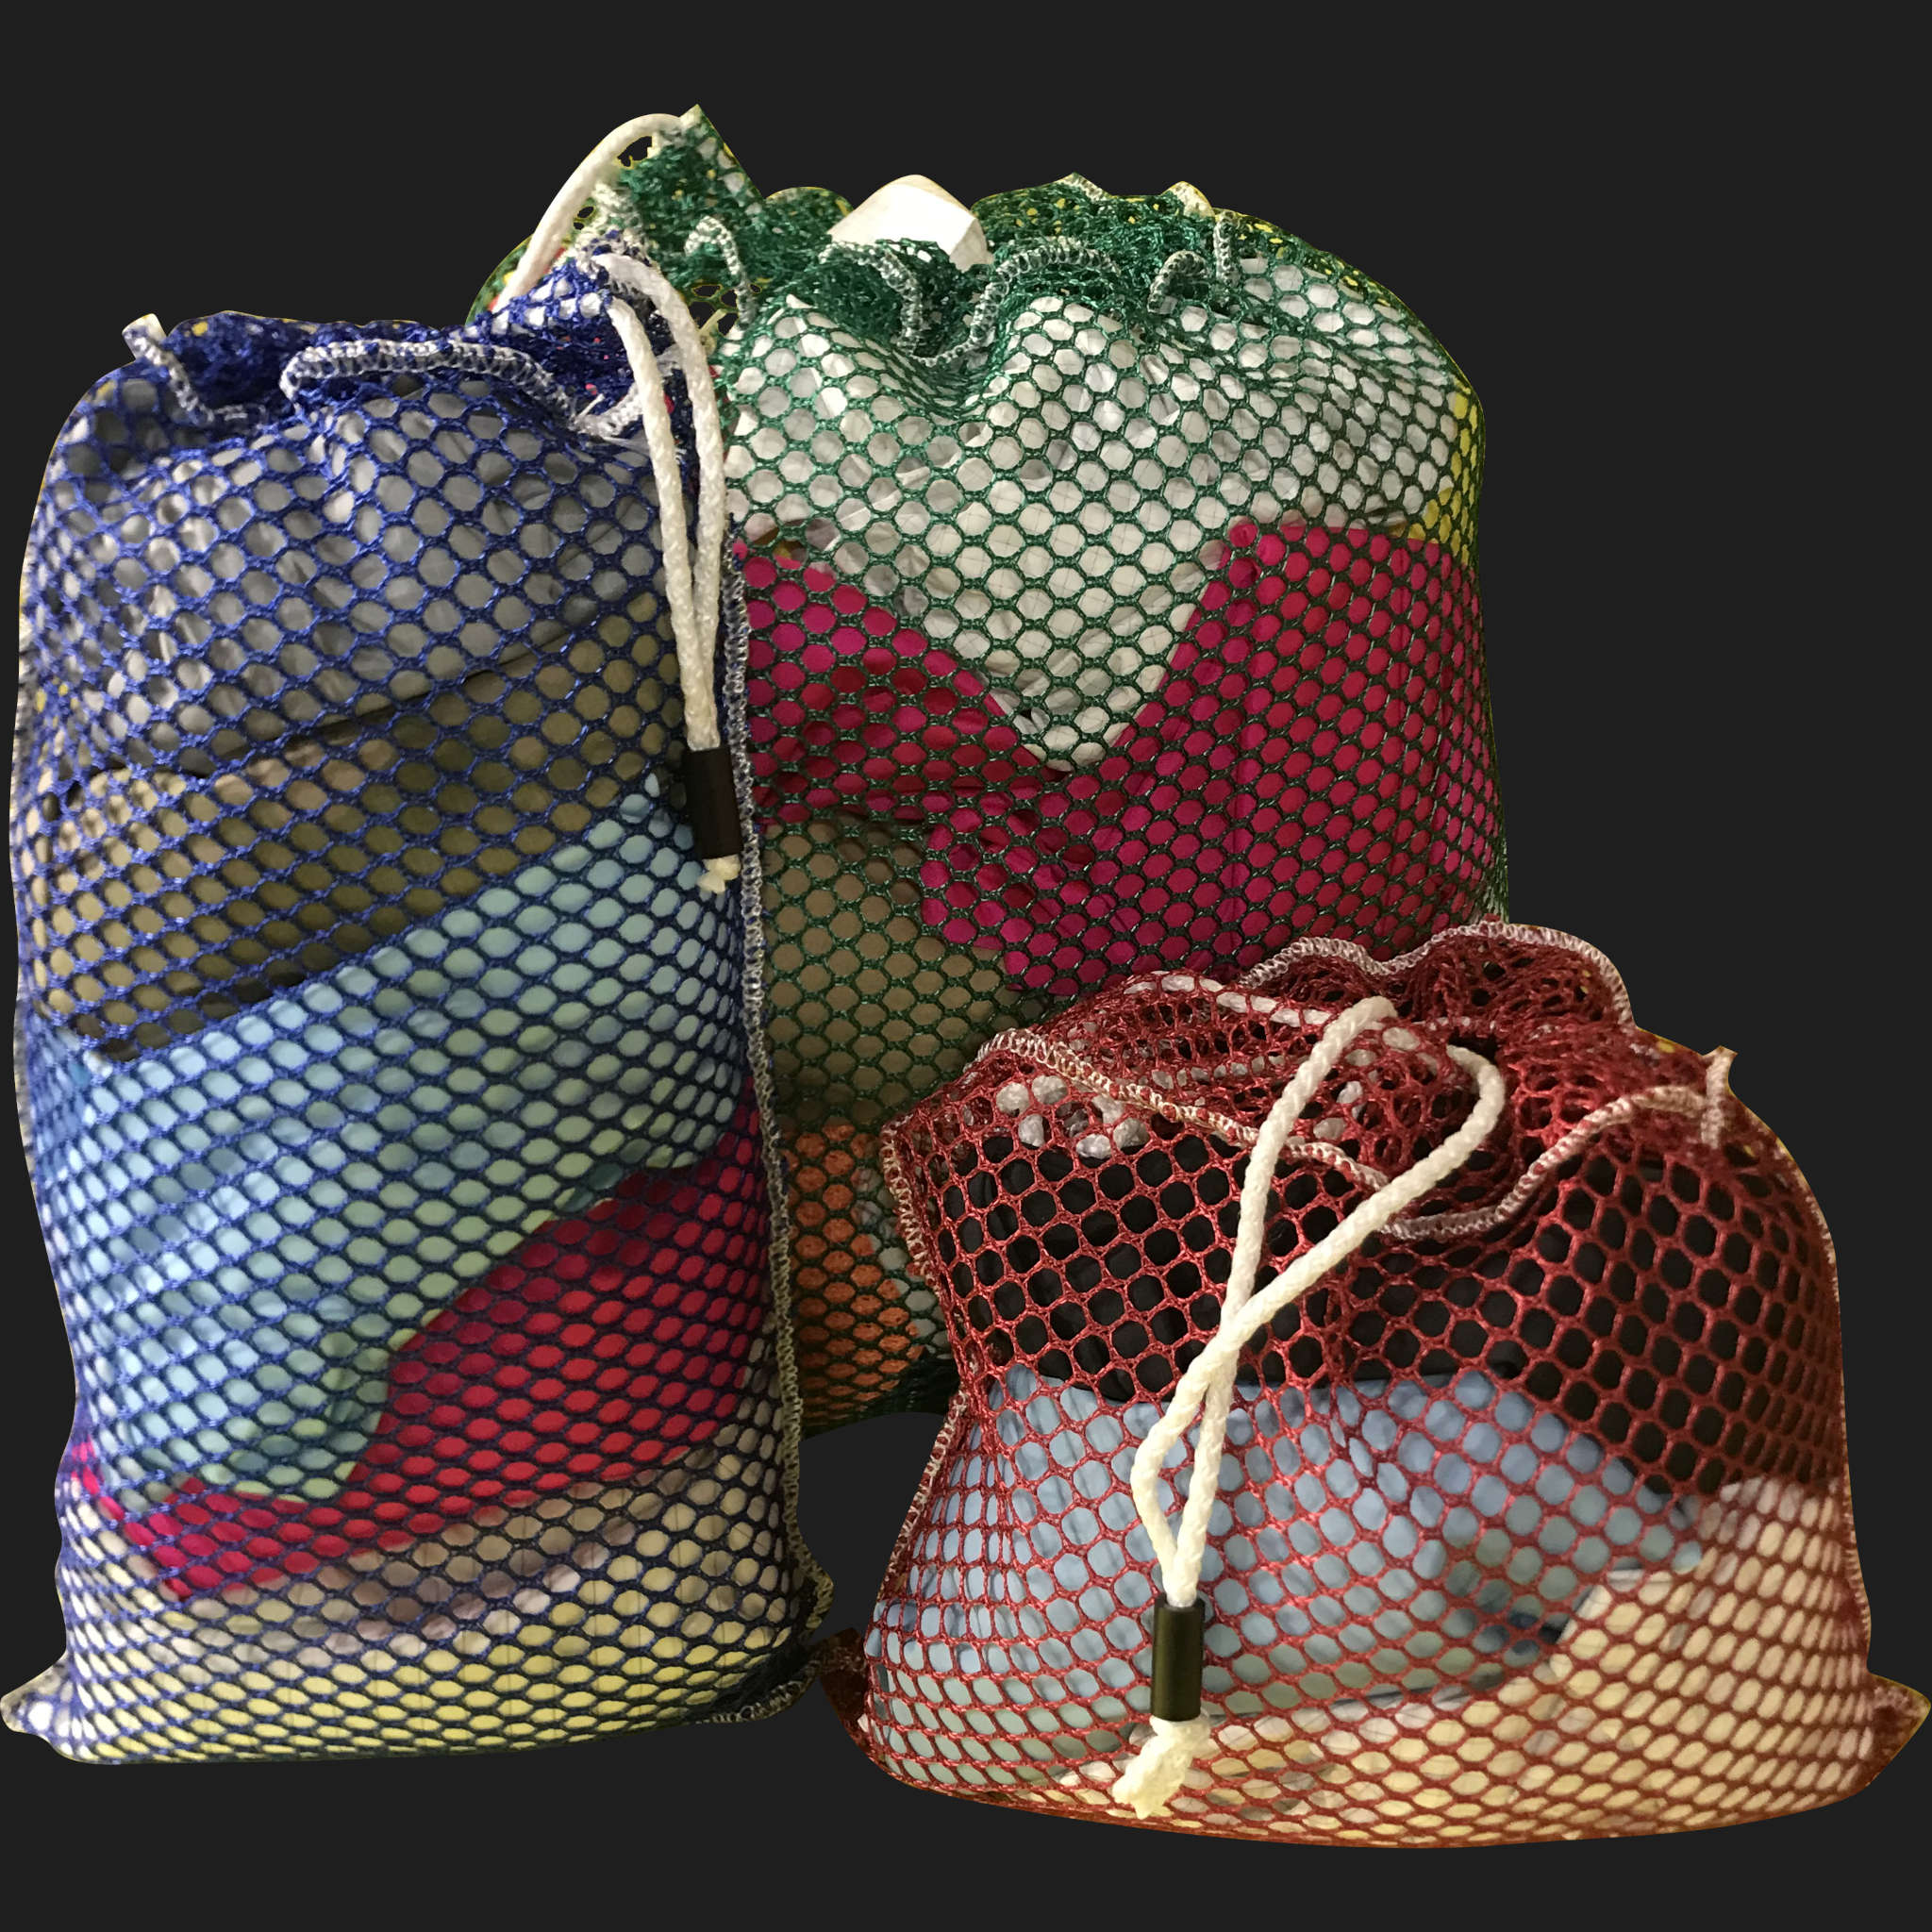 42" x 70" Customized Mesh-Net-Laundry Bags Heavy Duty with Cord and barrellock closure